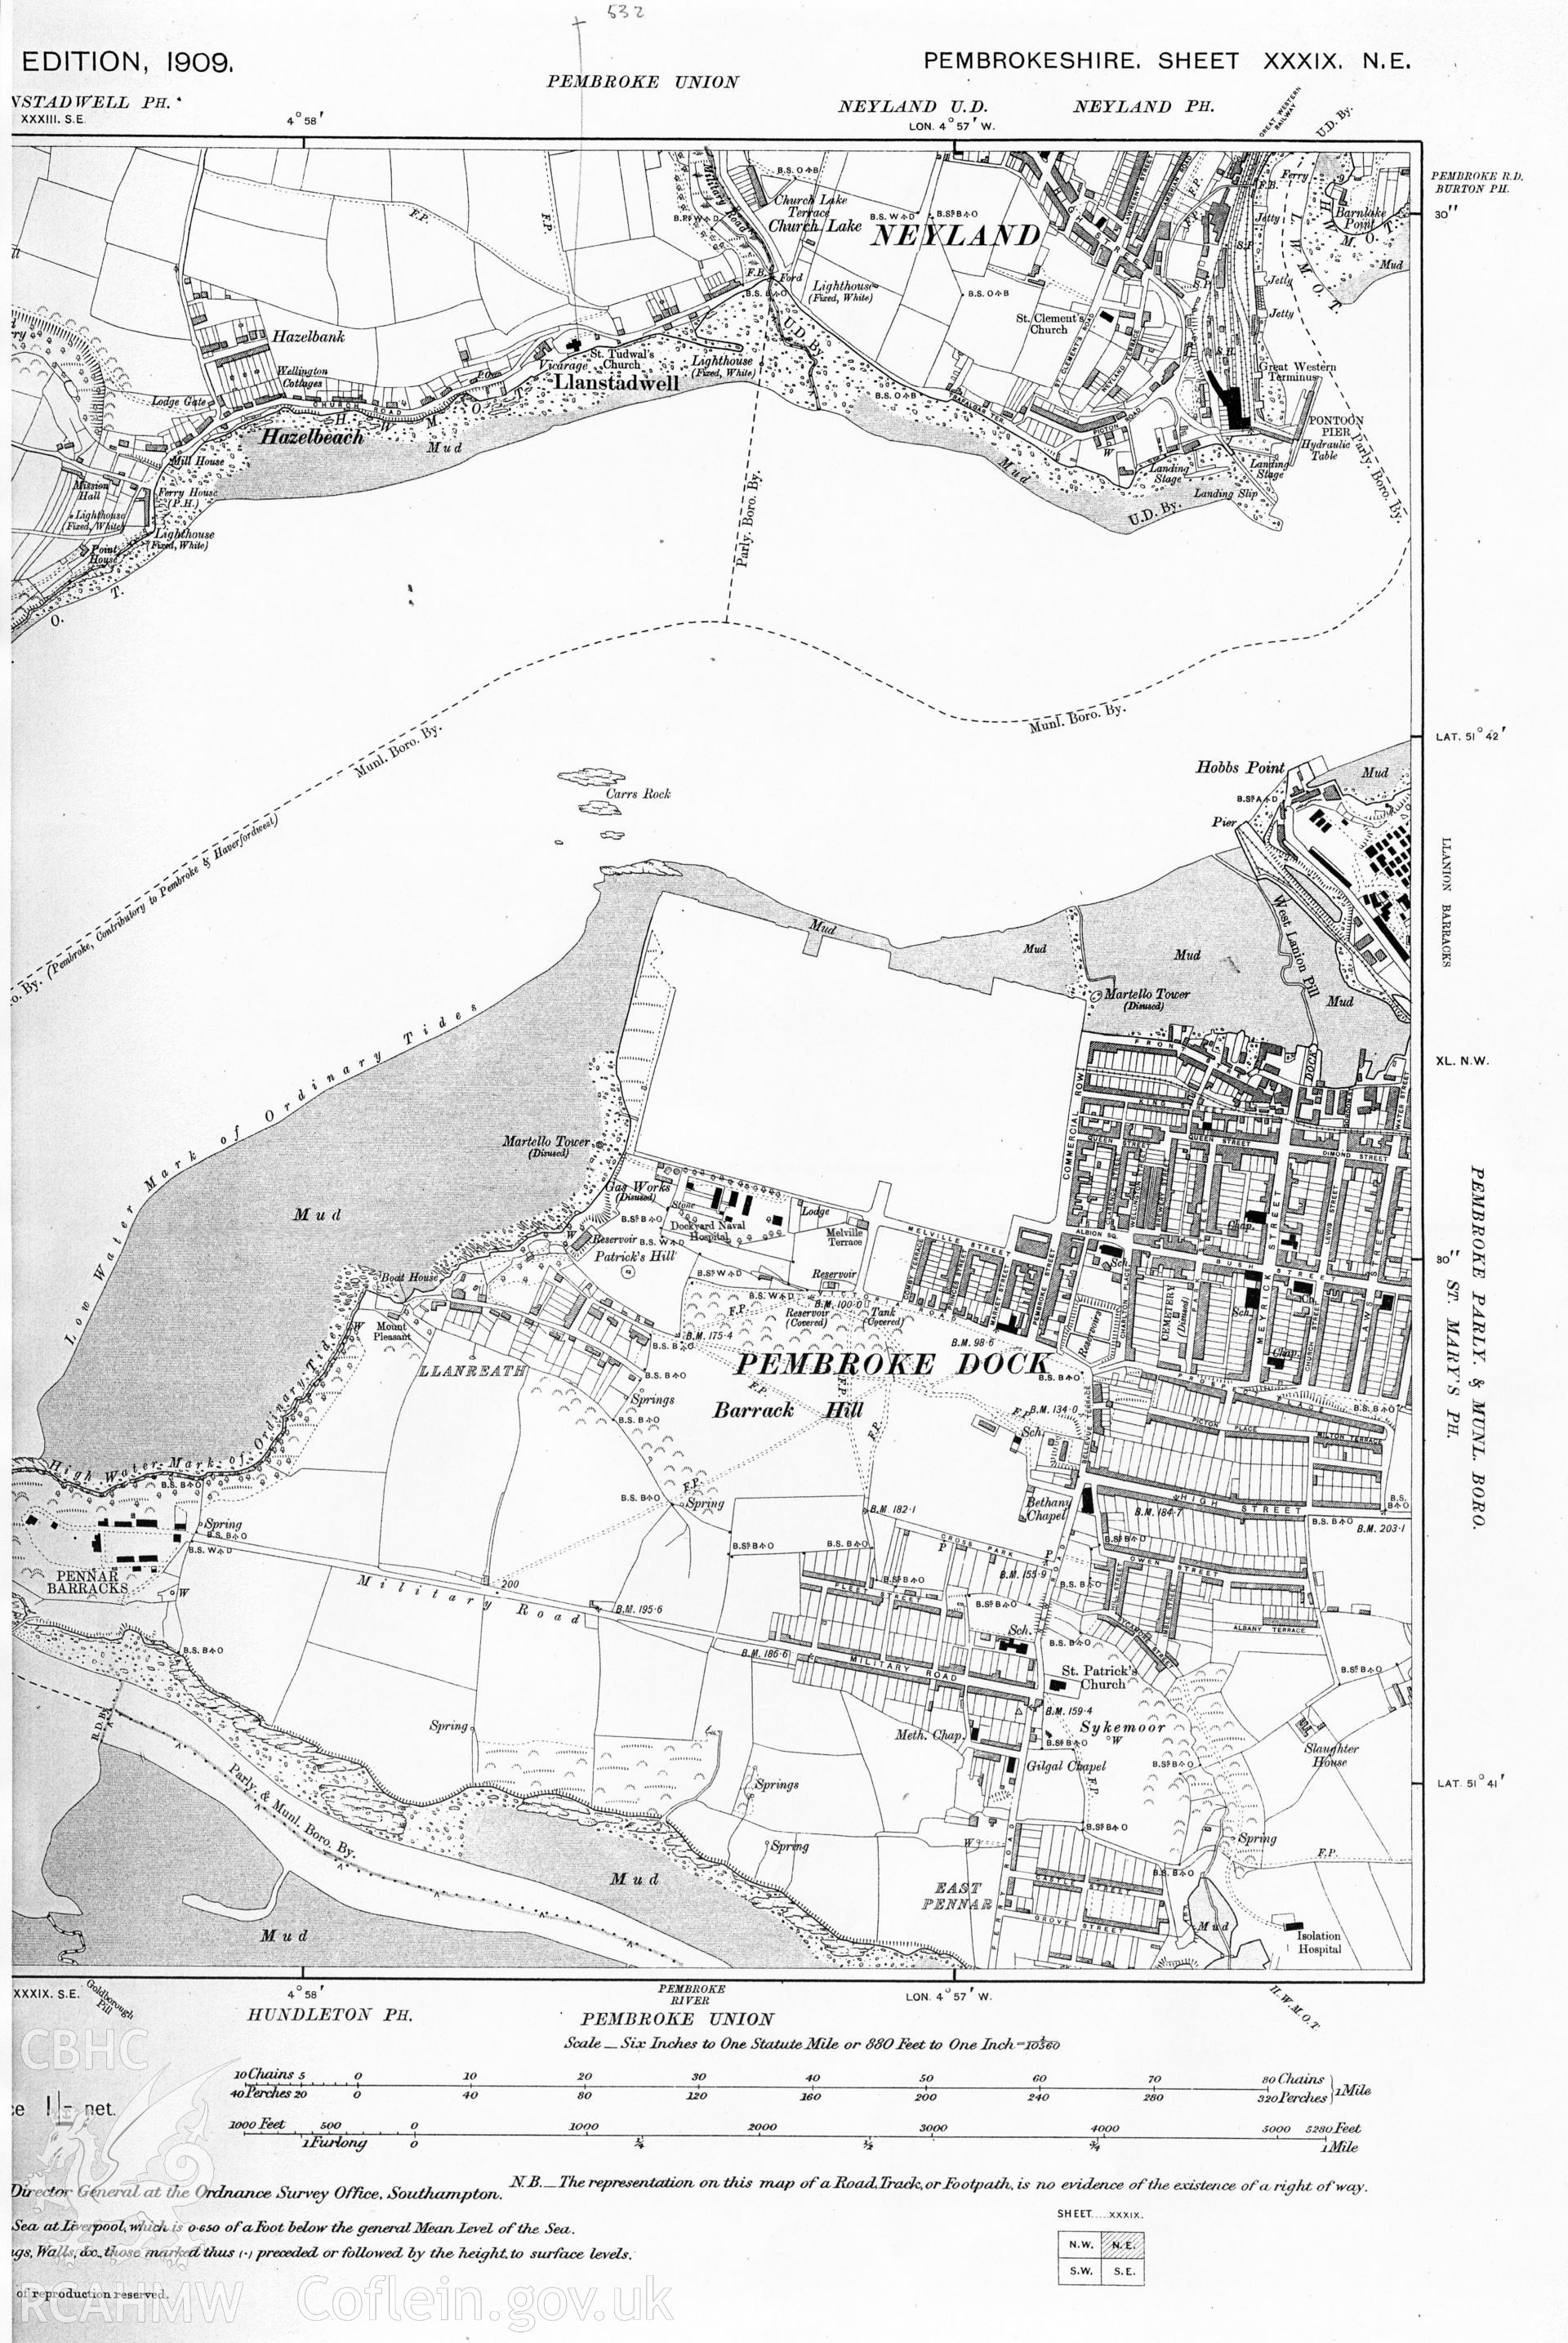 Digital copy of a 2nd edition OS map, showing the assessment area.